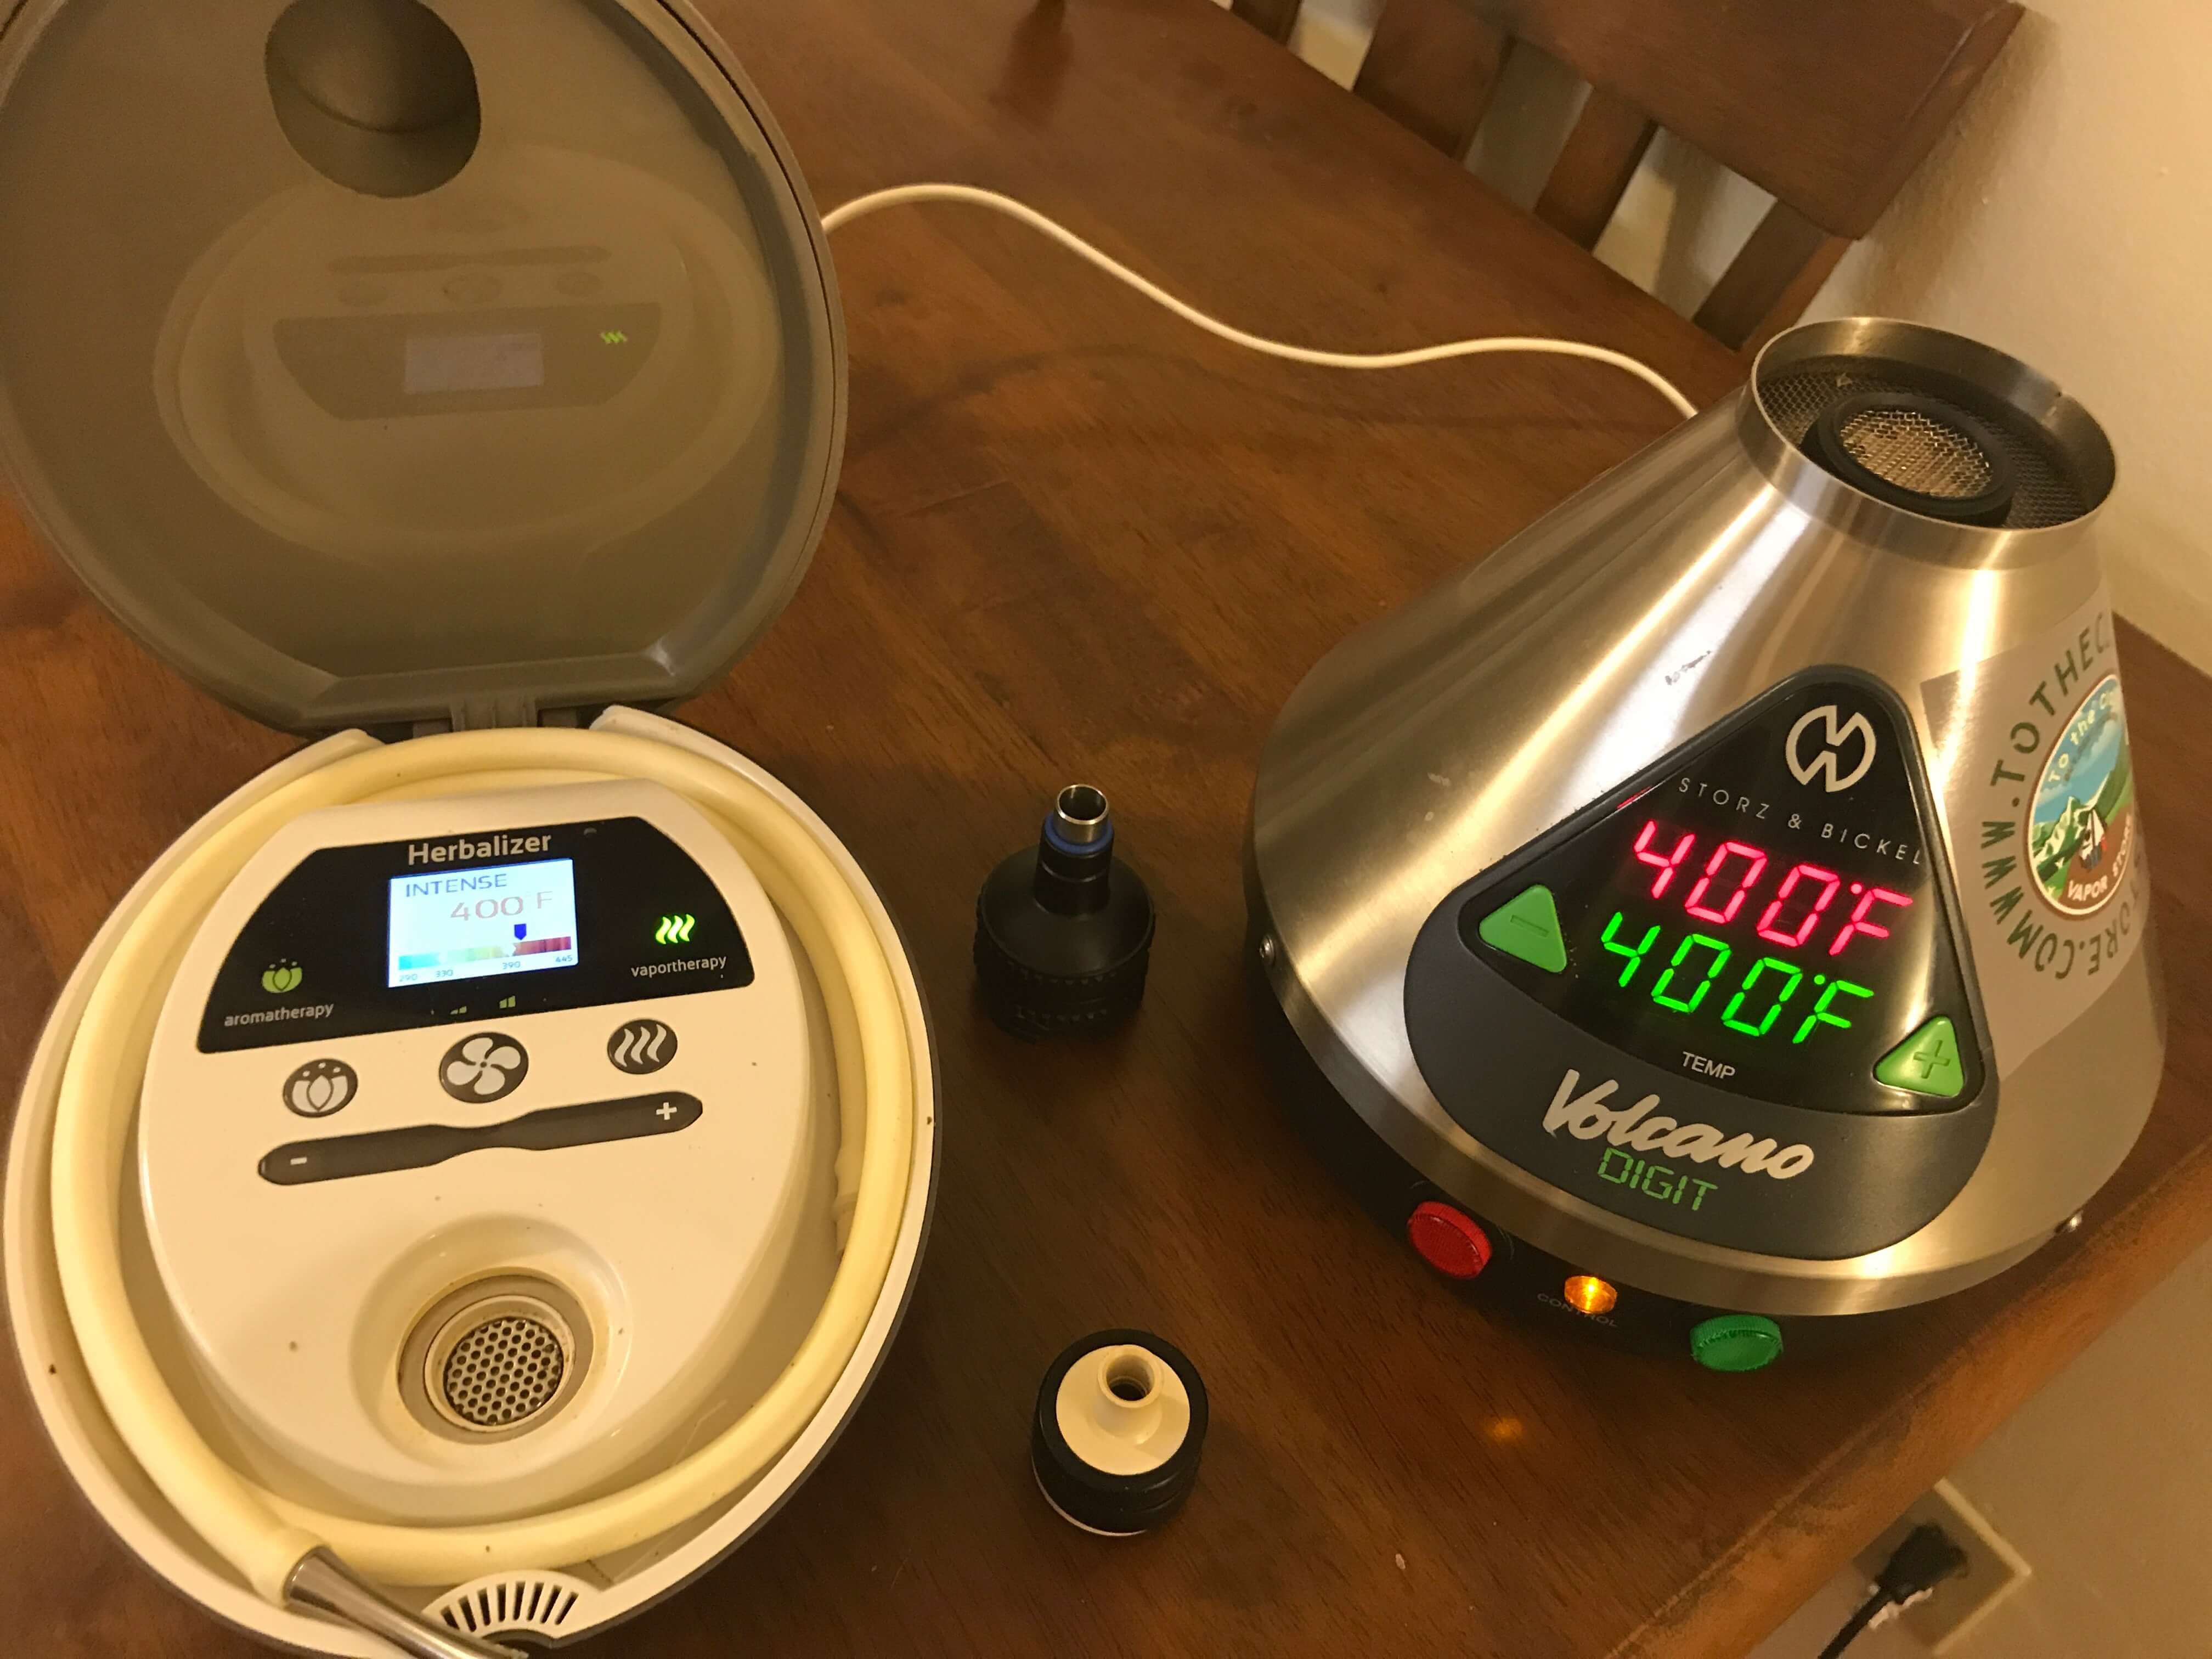 Comparing the Herbalizer to the Digital Volcano